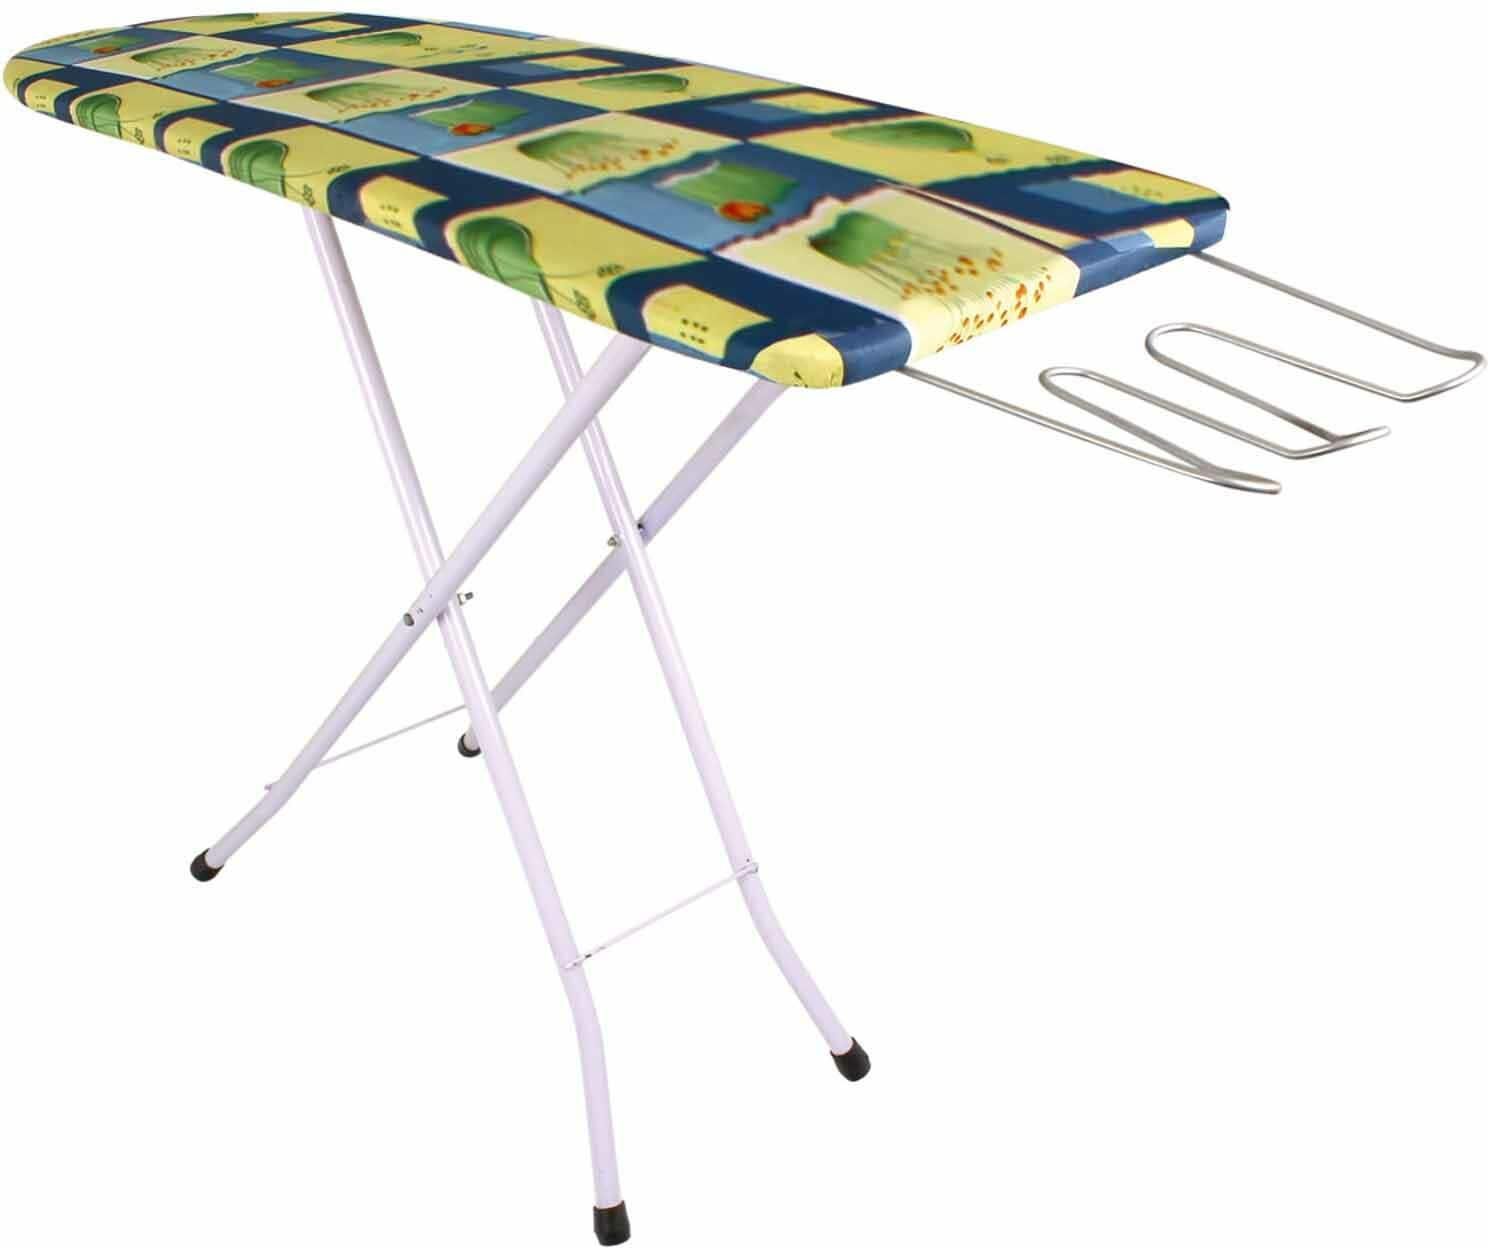 F1 Ironing Table - Mixed color